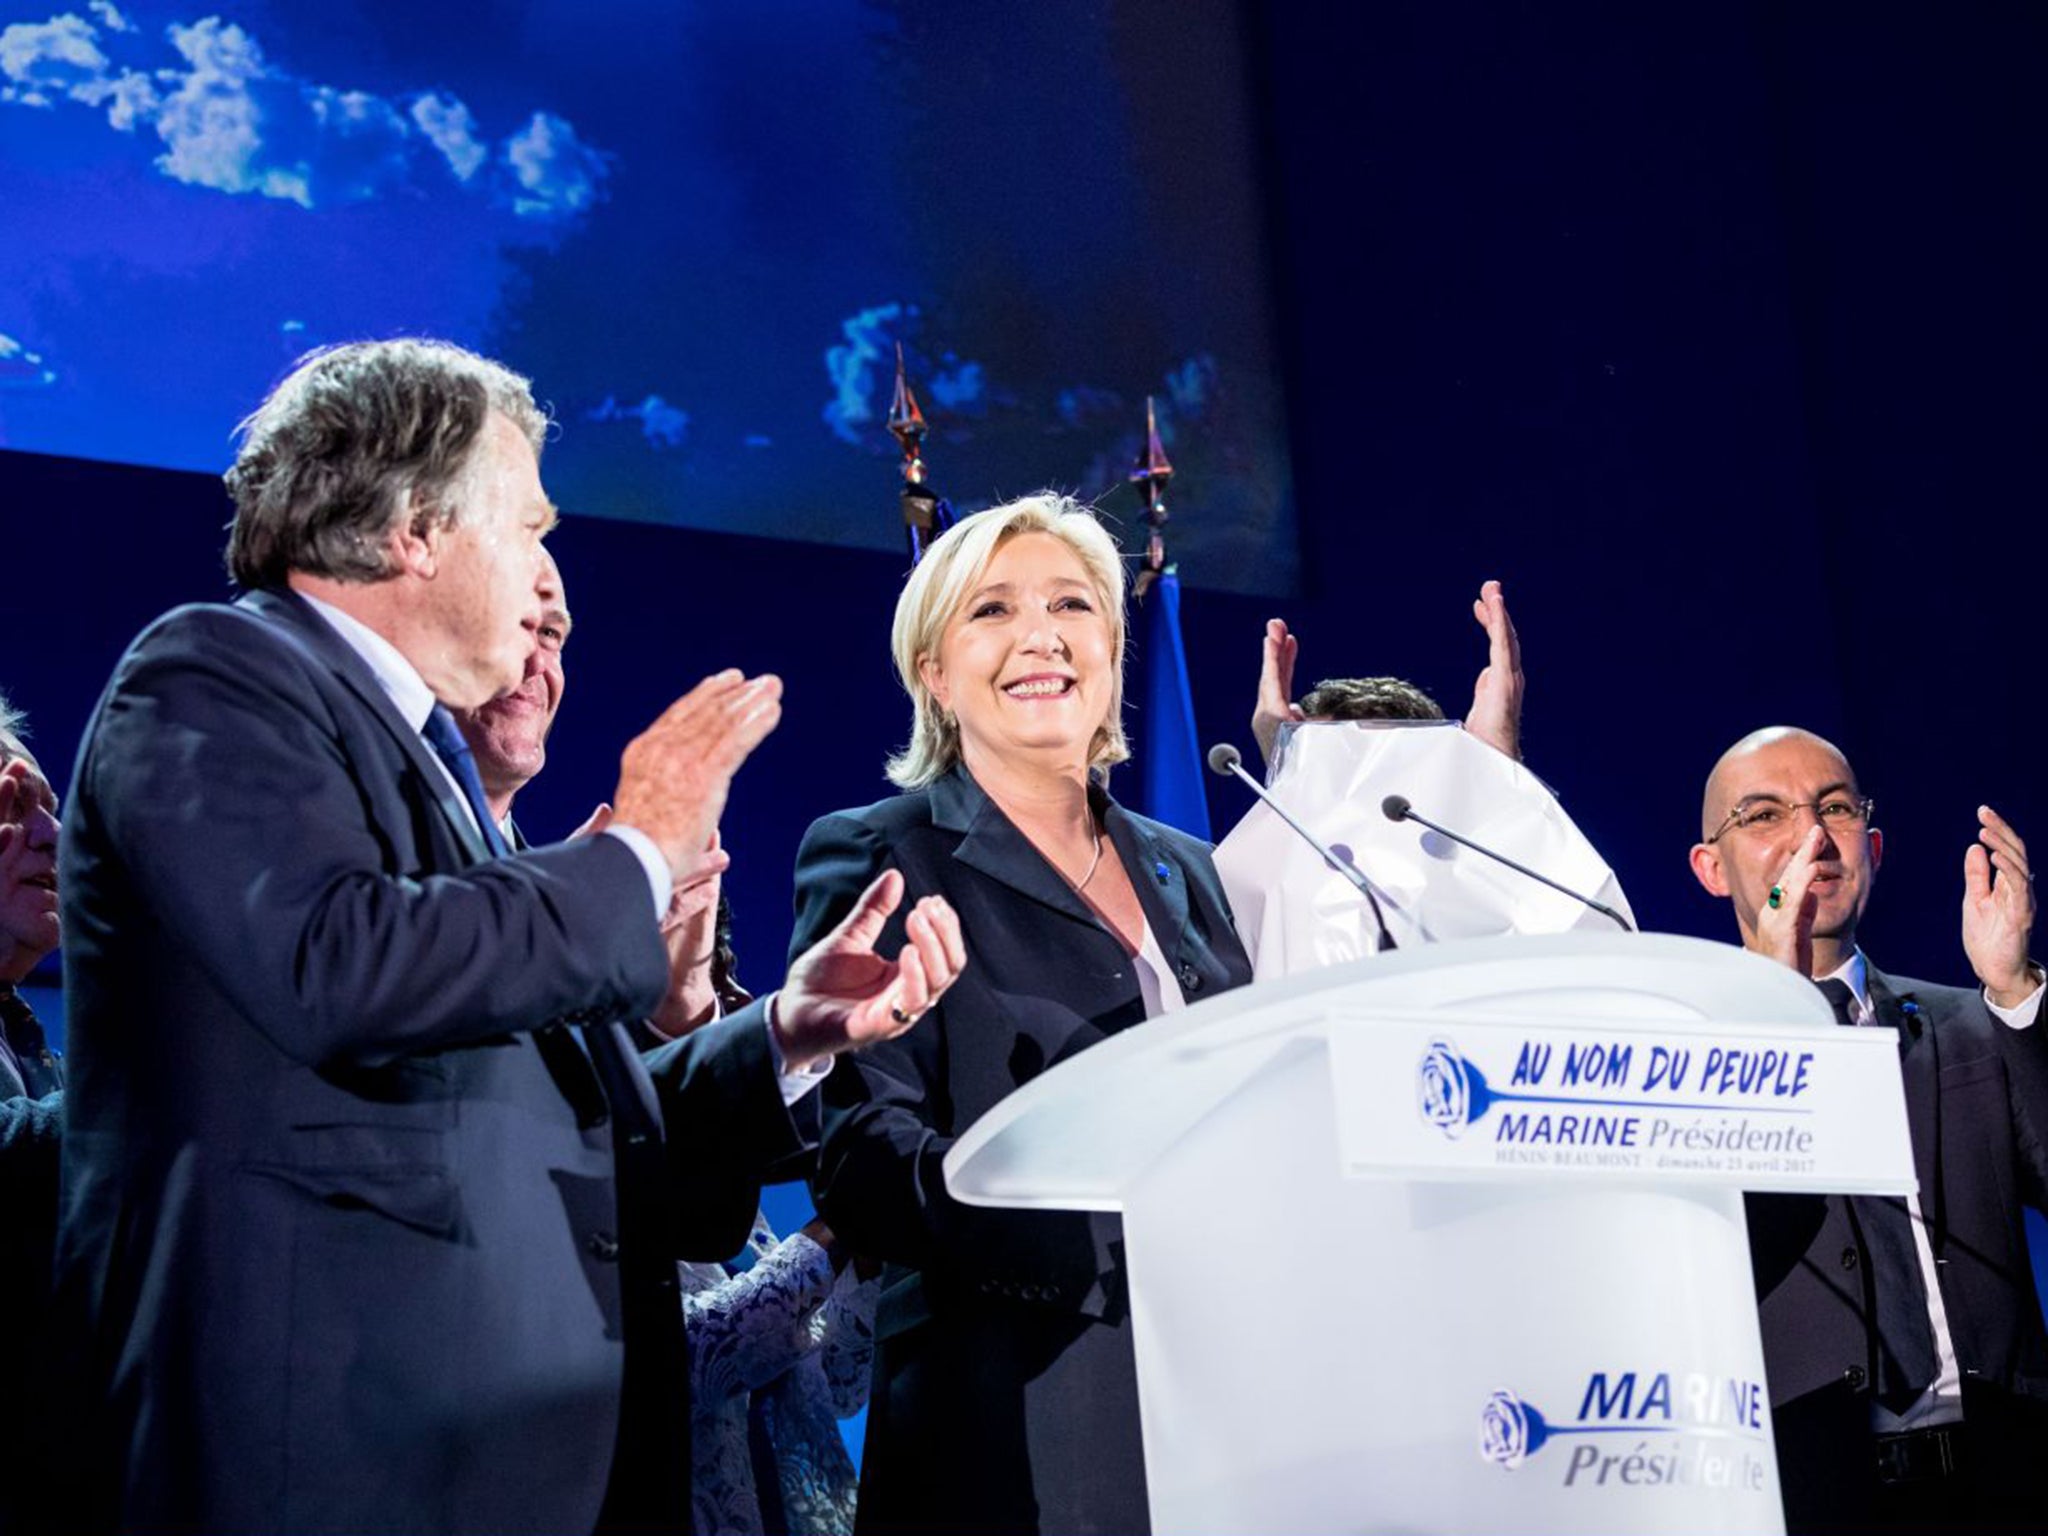 Marine Le Pen soaks up applause from her supporters